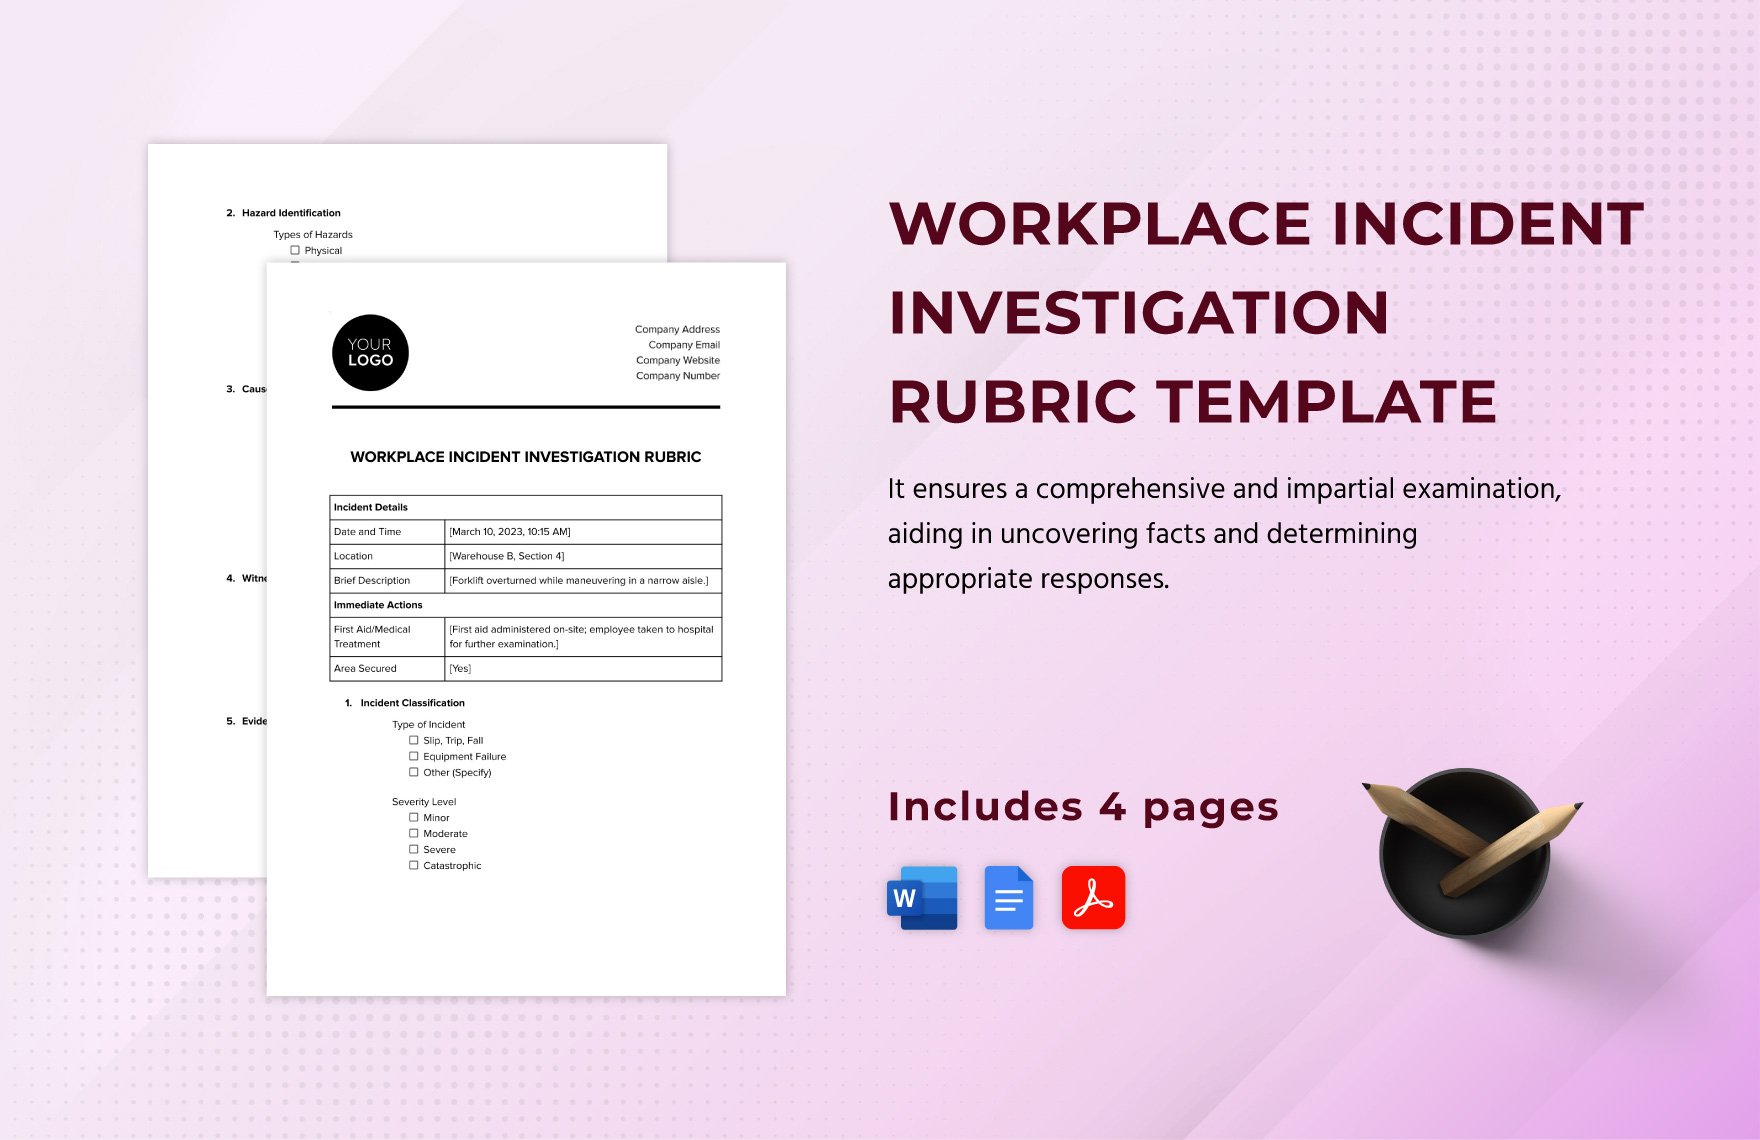 Workplace Incident Investigation Rubric Template in Word, Google Docs, PDF